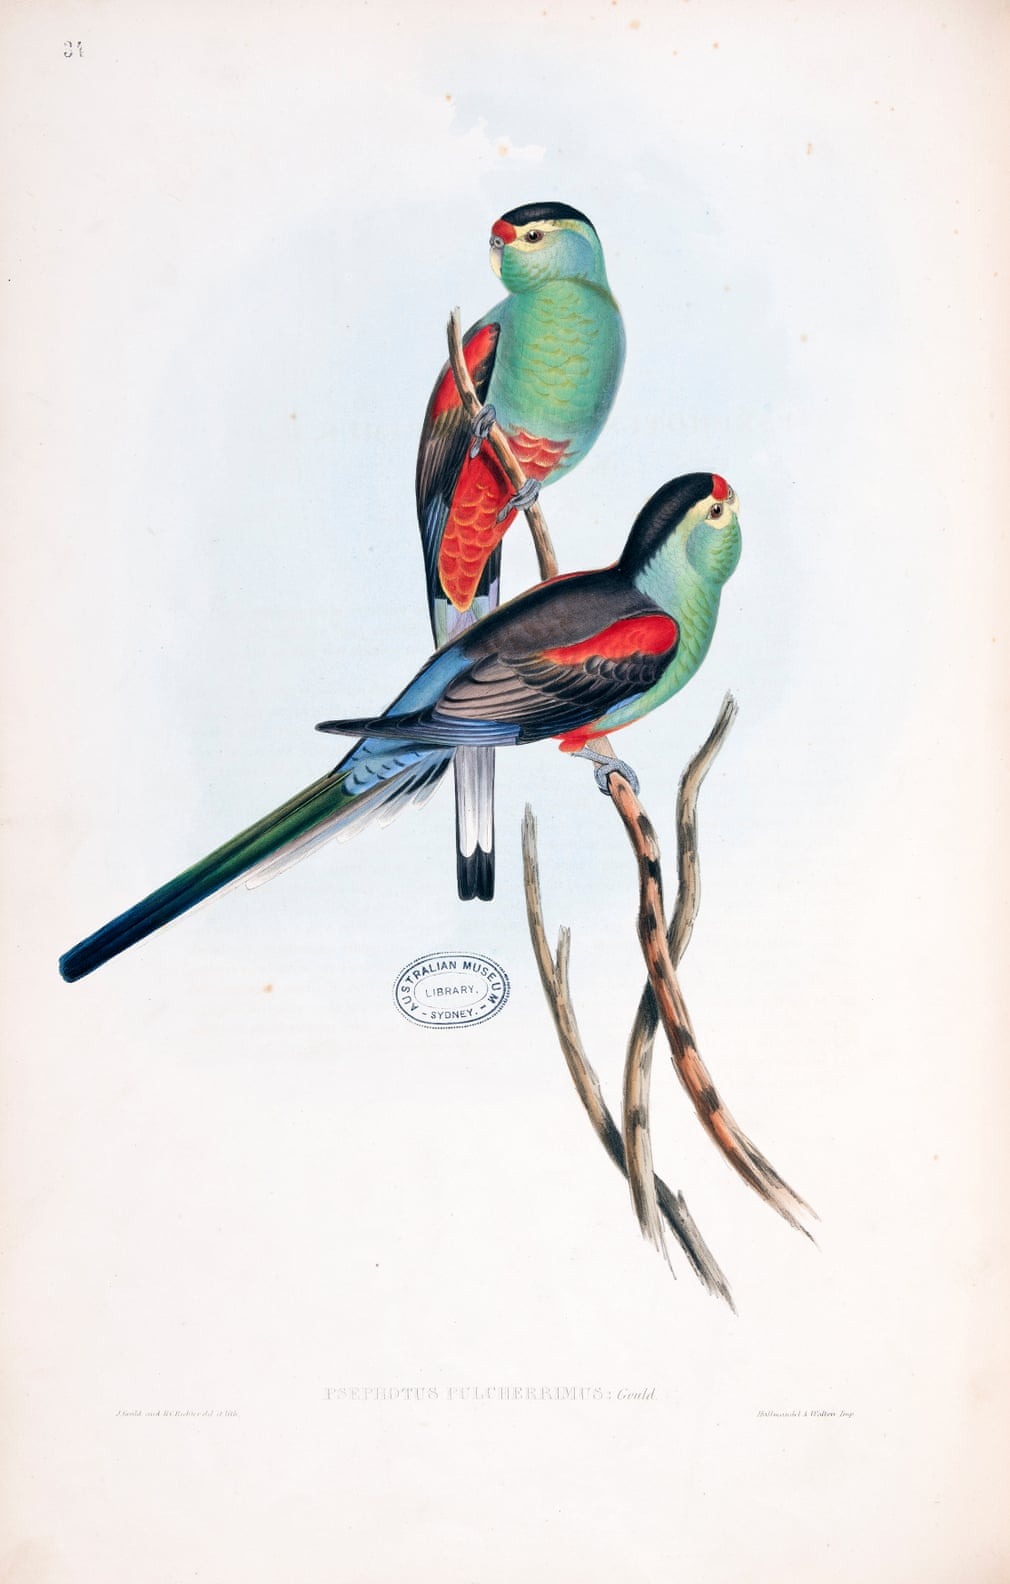 Birds Of Australia, Fascinating Illustrations From The 19th Century By Elizabeth Gould (4)